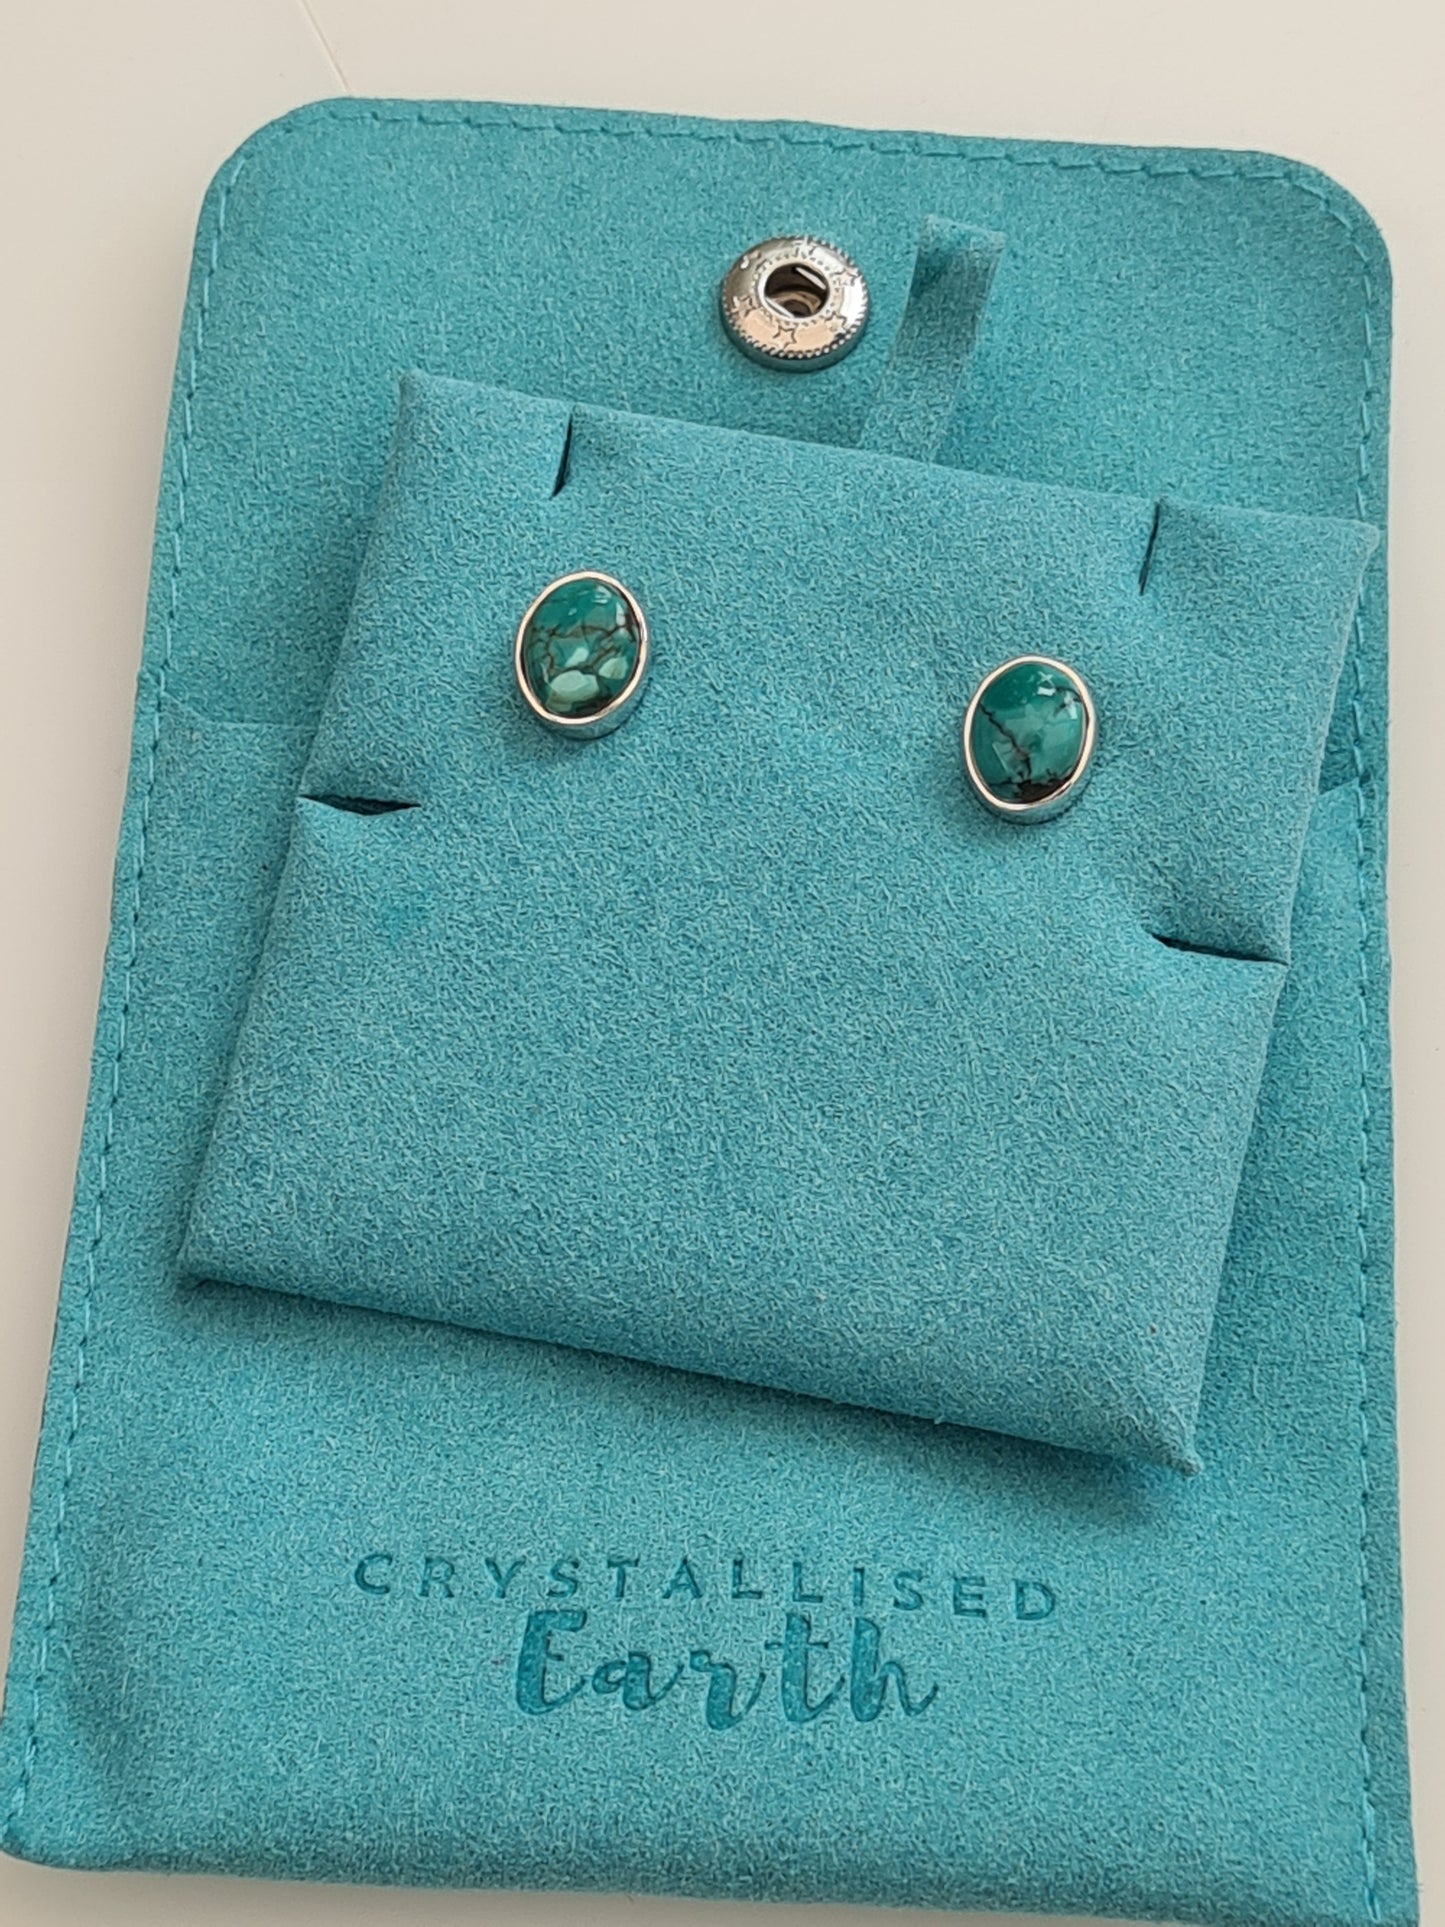 Turquoise Earrings | Sterling Silver